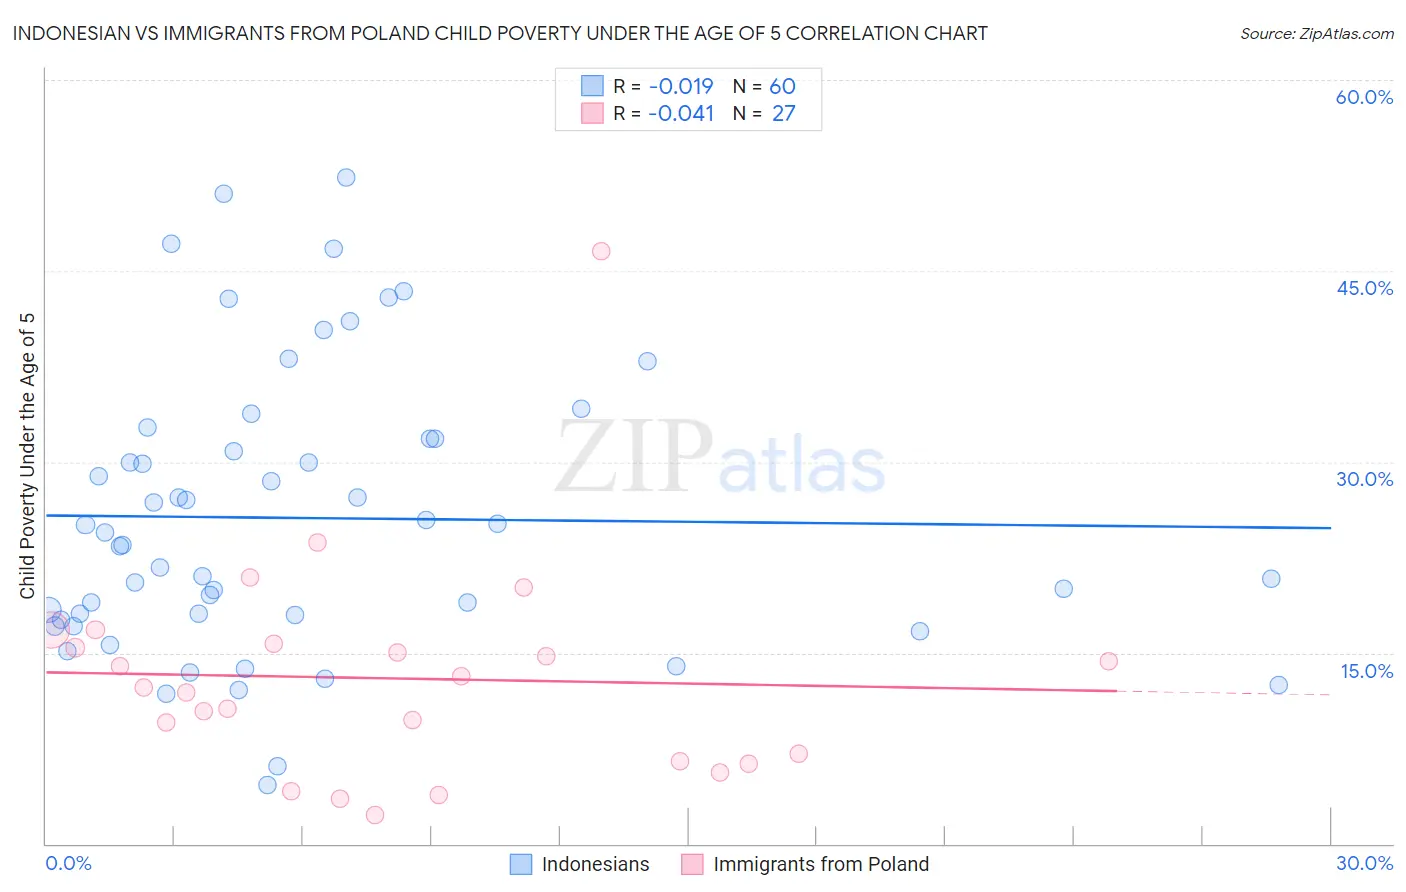 Indonesian vs Immigrants from Poland Child Poverty Under the Age of 5